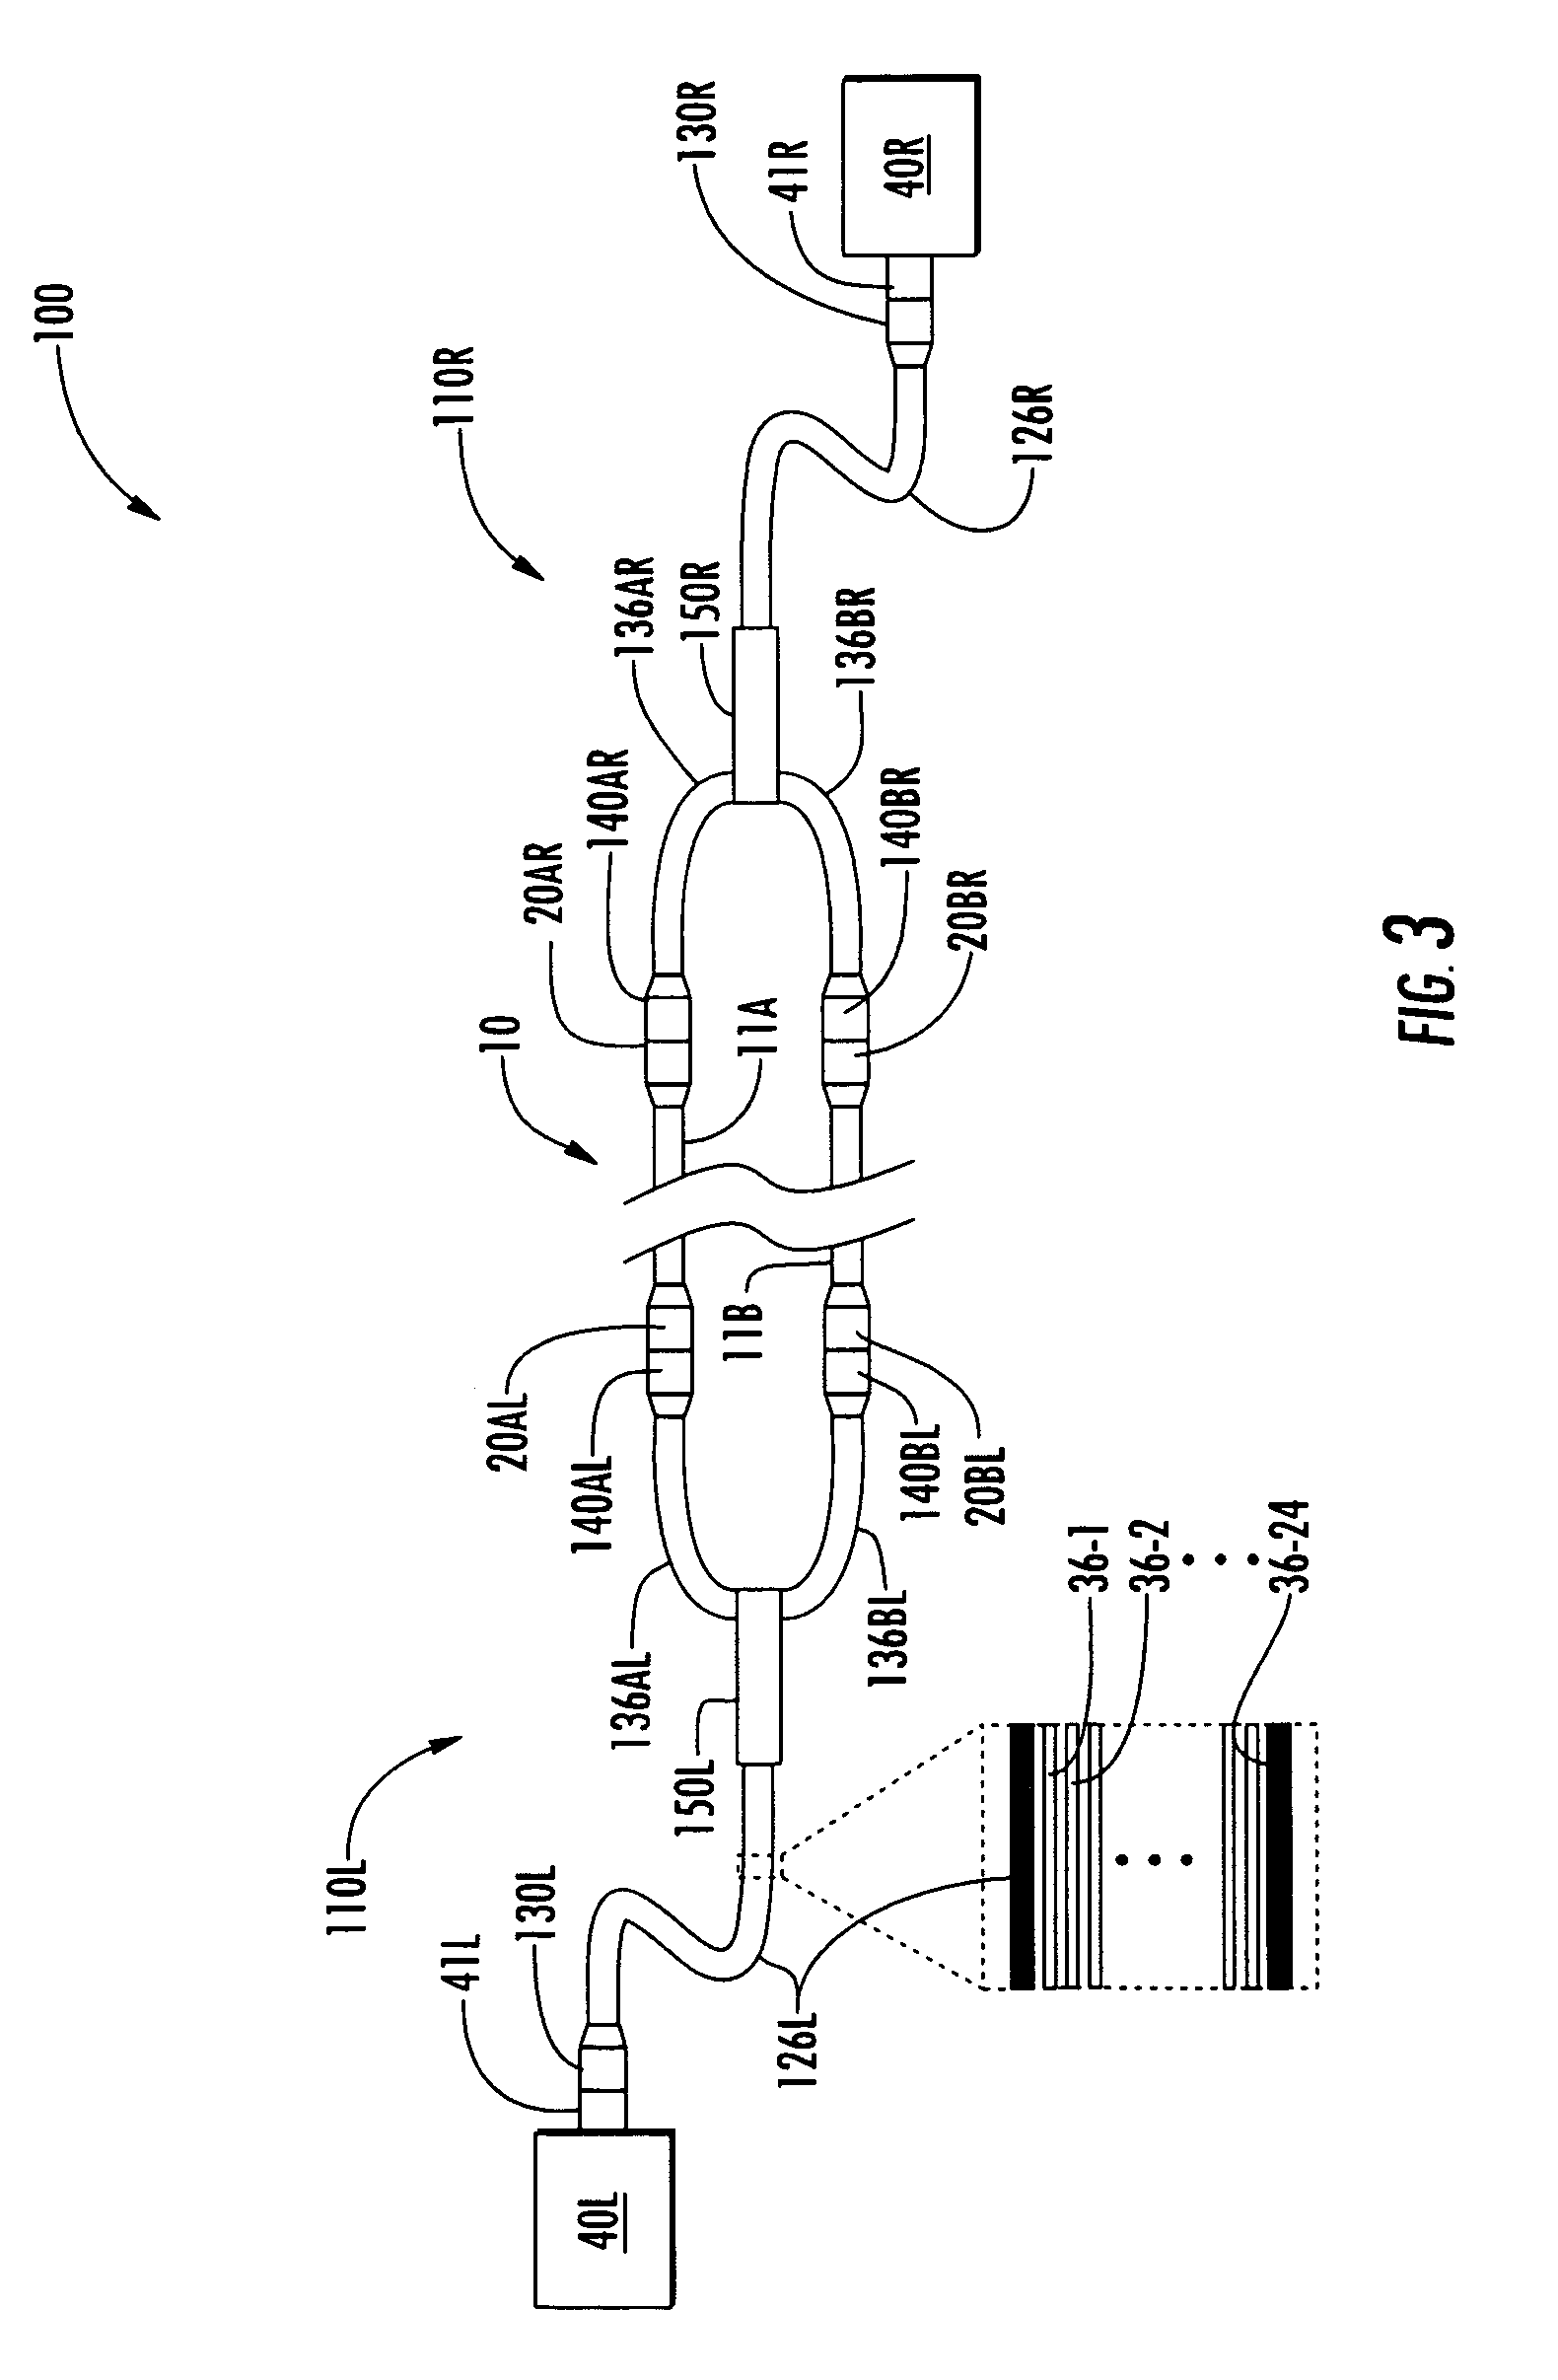 Optical interconnection assemblies and systems for high-speed data-rate optical transport systems